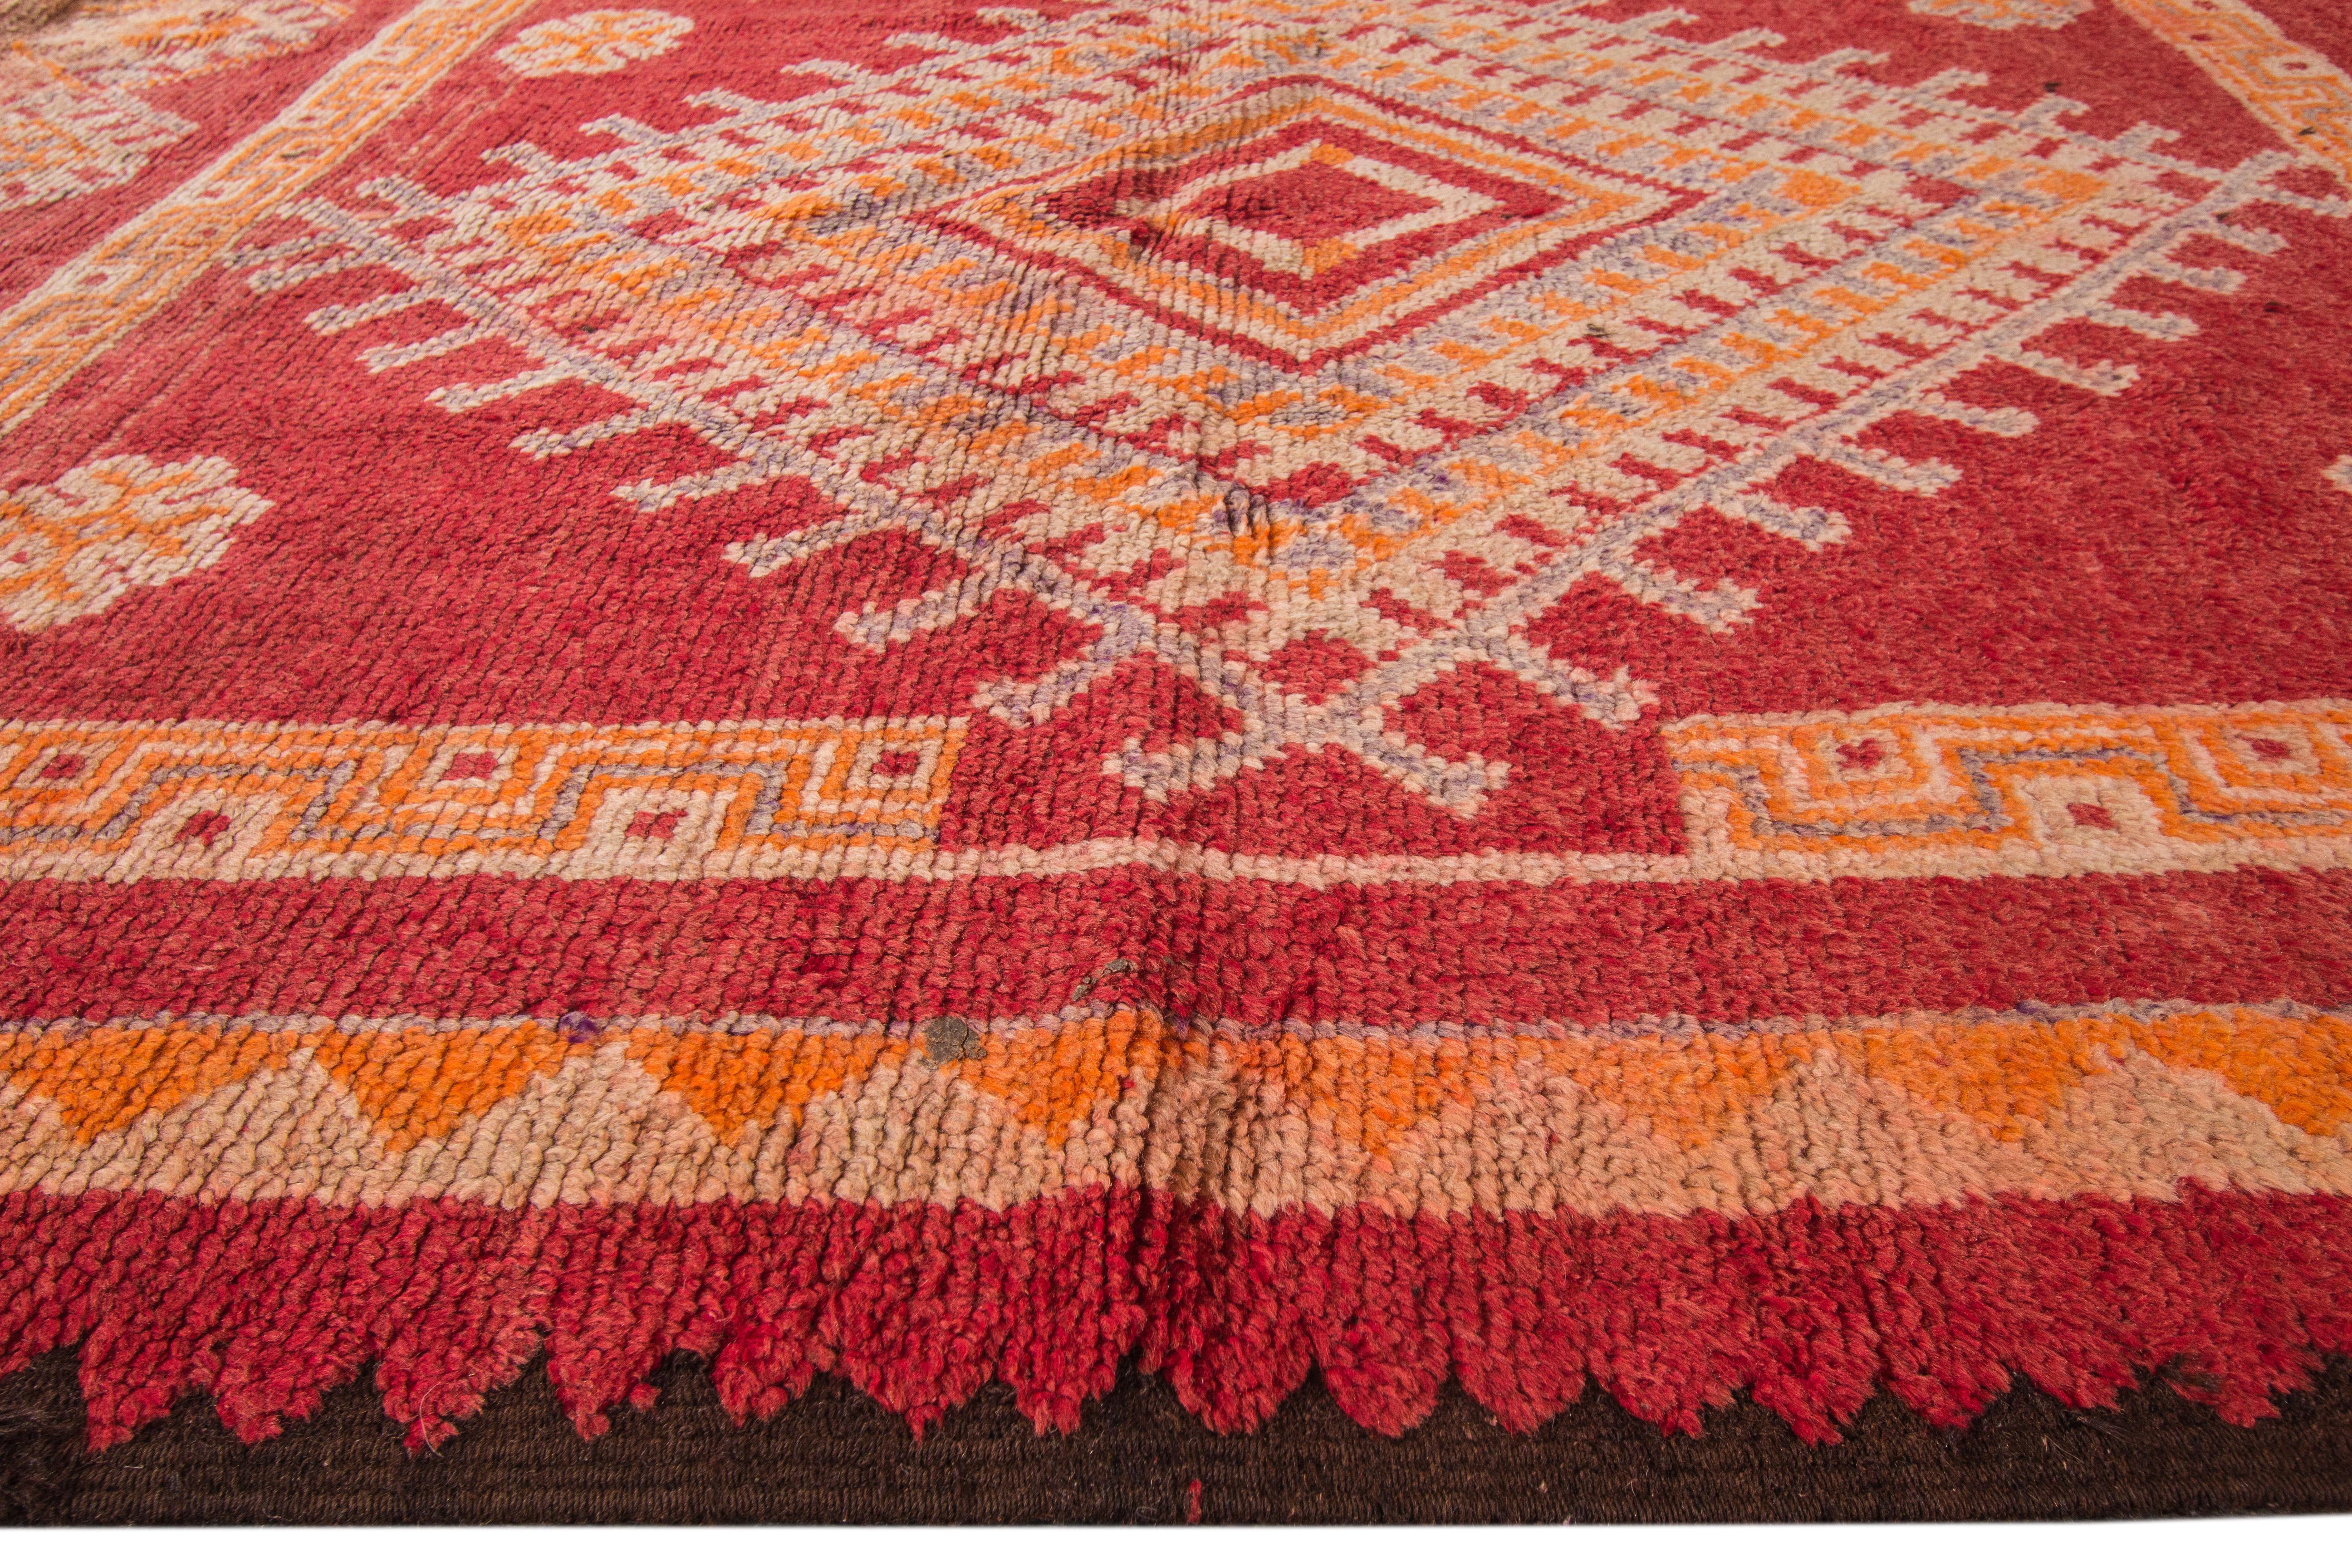 Vintage 1940s Red and Orange Moroccan Rug, 5.10x13.02 For Sale 1